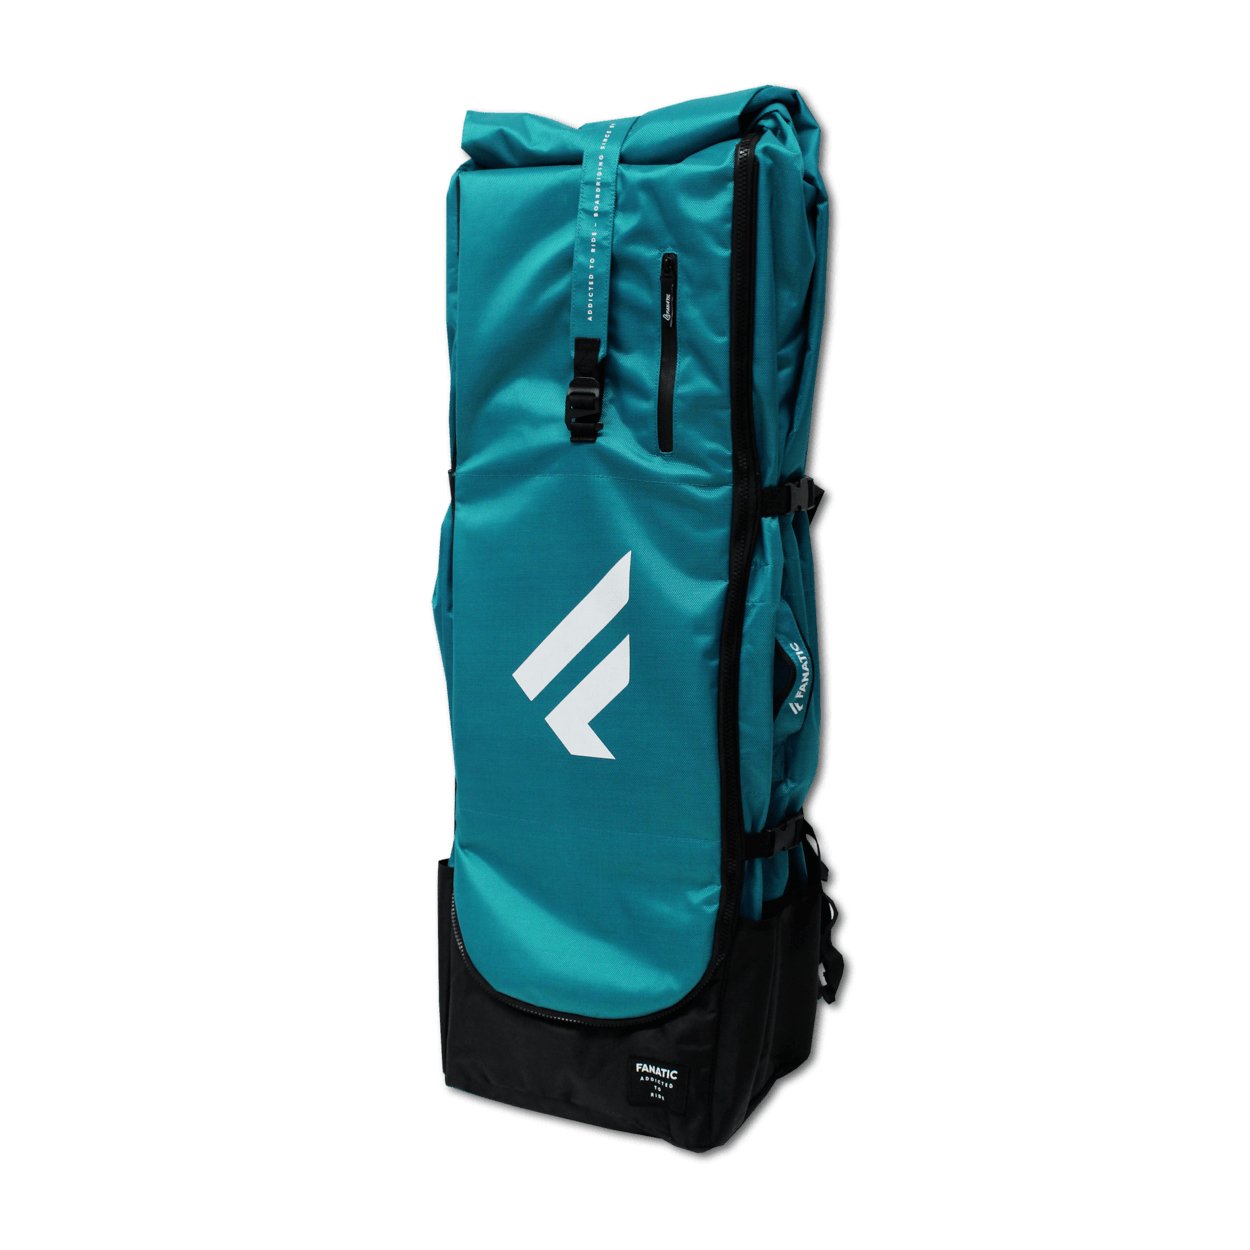 Fanatic Gearbag Pocket iSUP 2023 - Worthing Watersports - 9008415928040 - Spareparts - Fanatic SUP